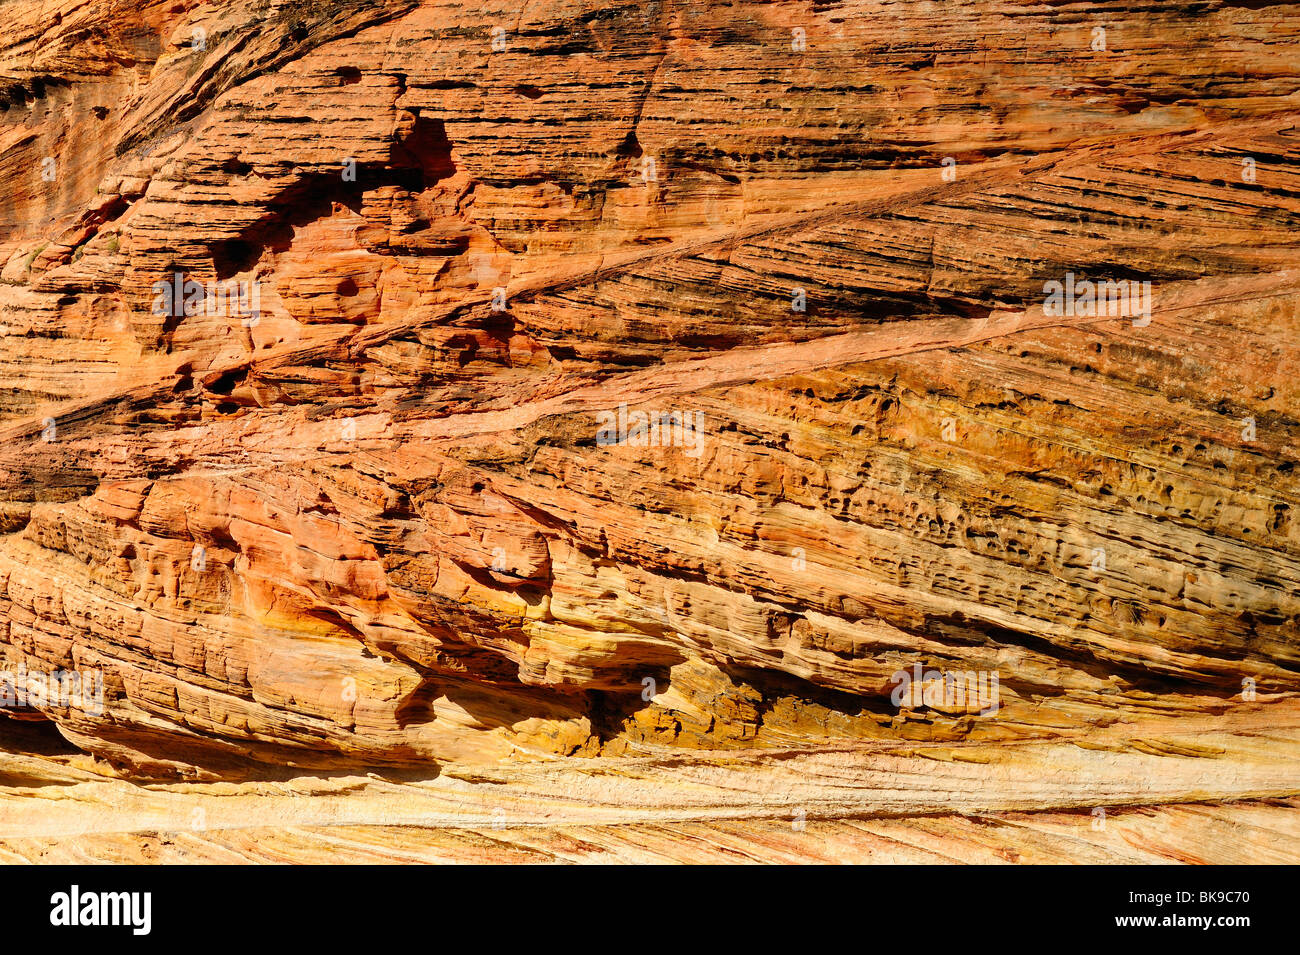 Cliff on the way to Observation Point in Zion National Park, Utah, USA Stock Photo